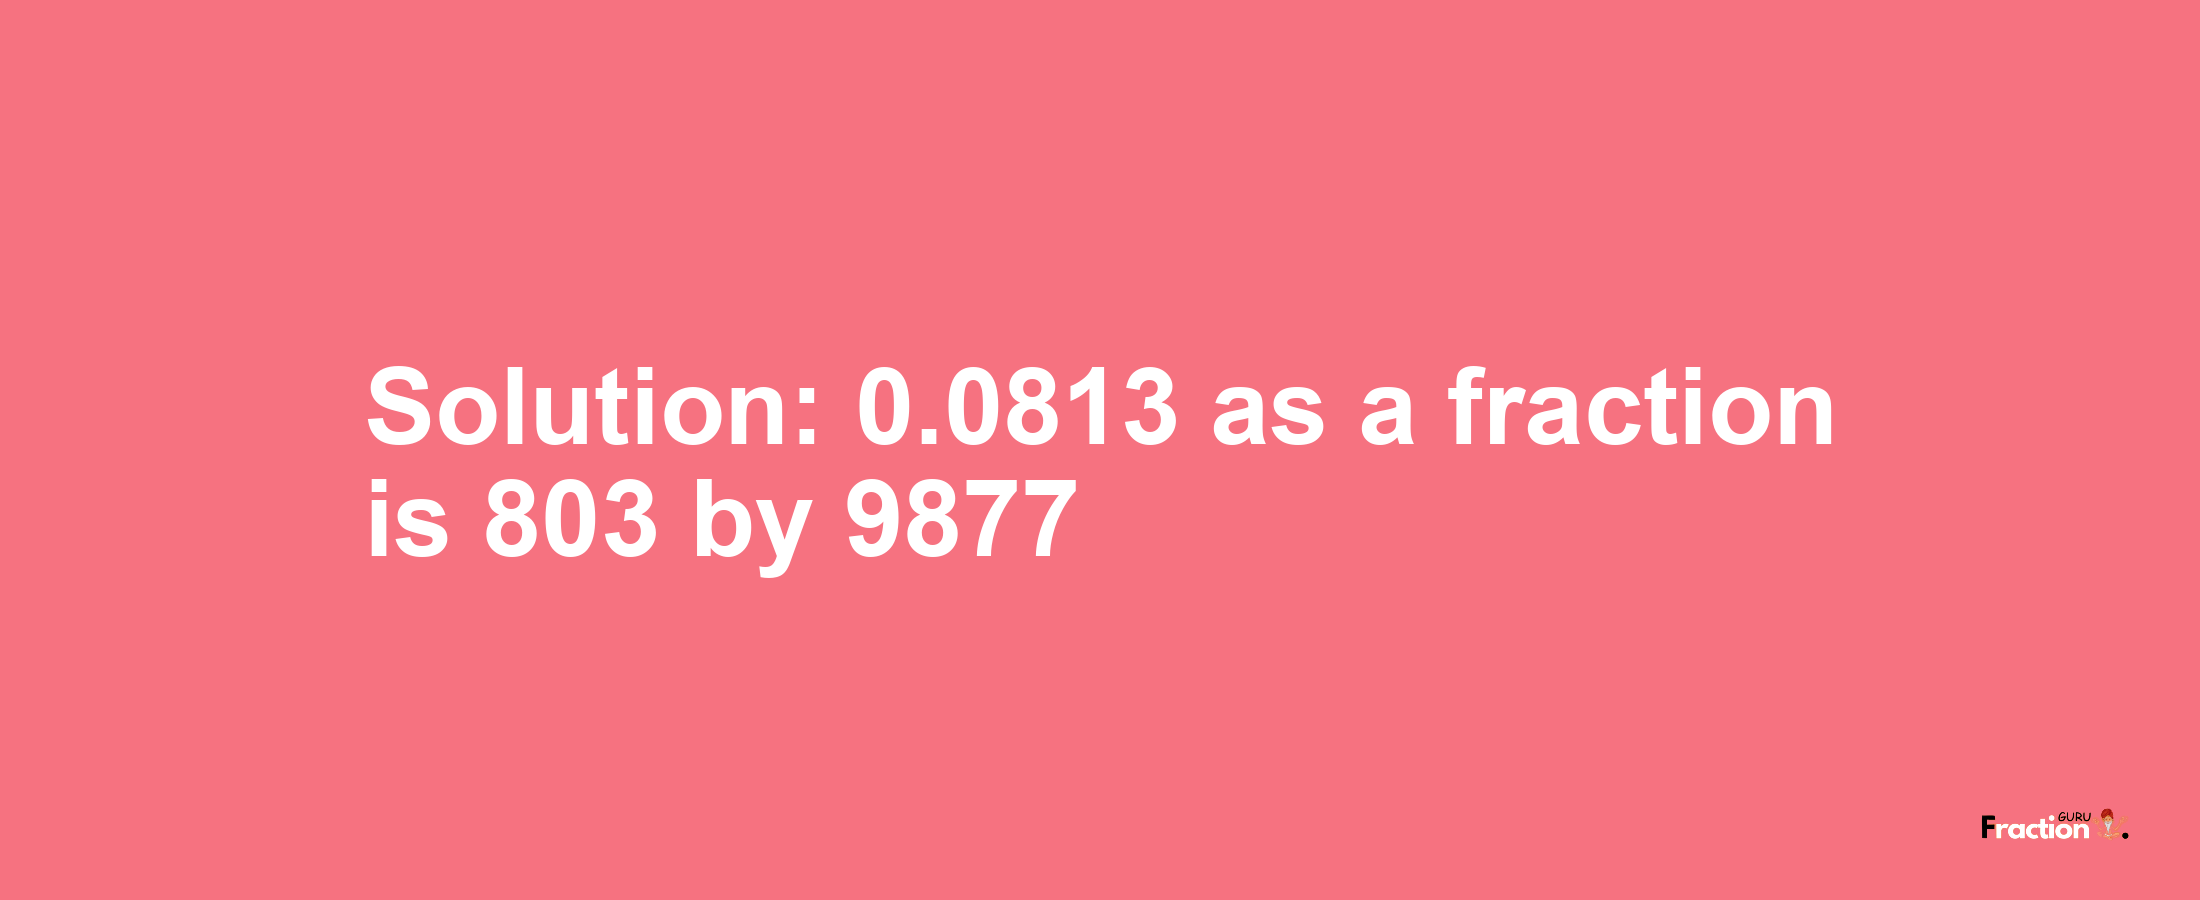 Solution:0.0813 as a fraction is 803/9877